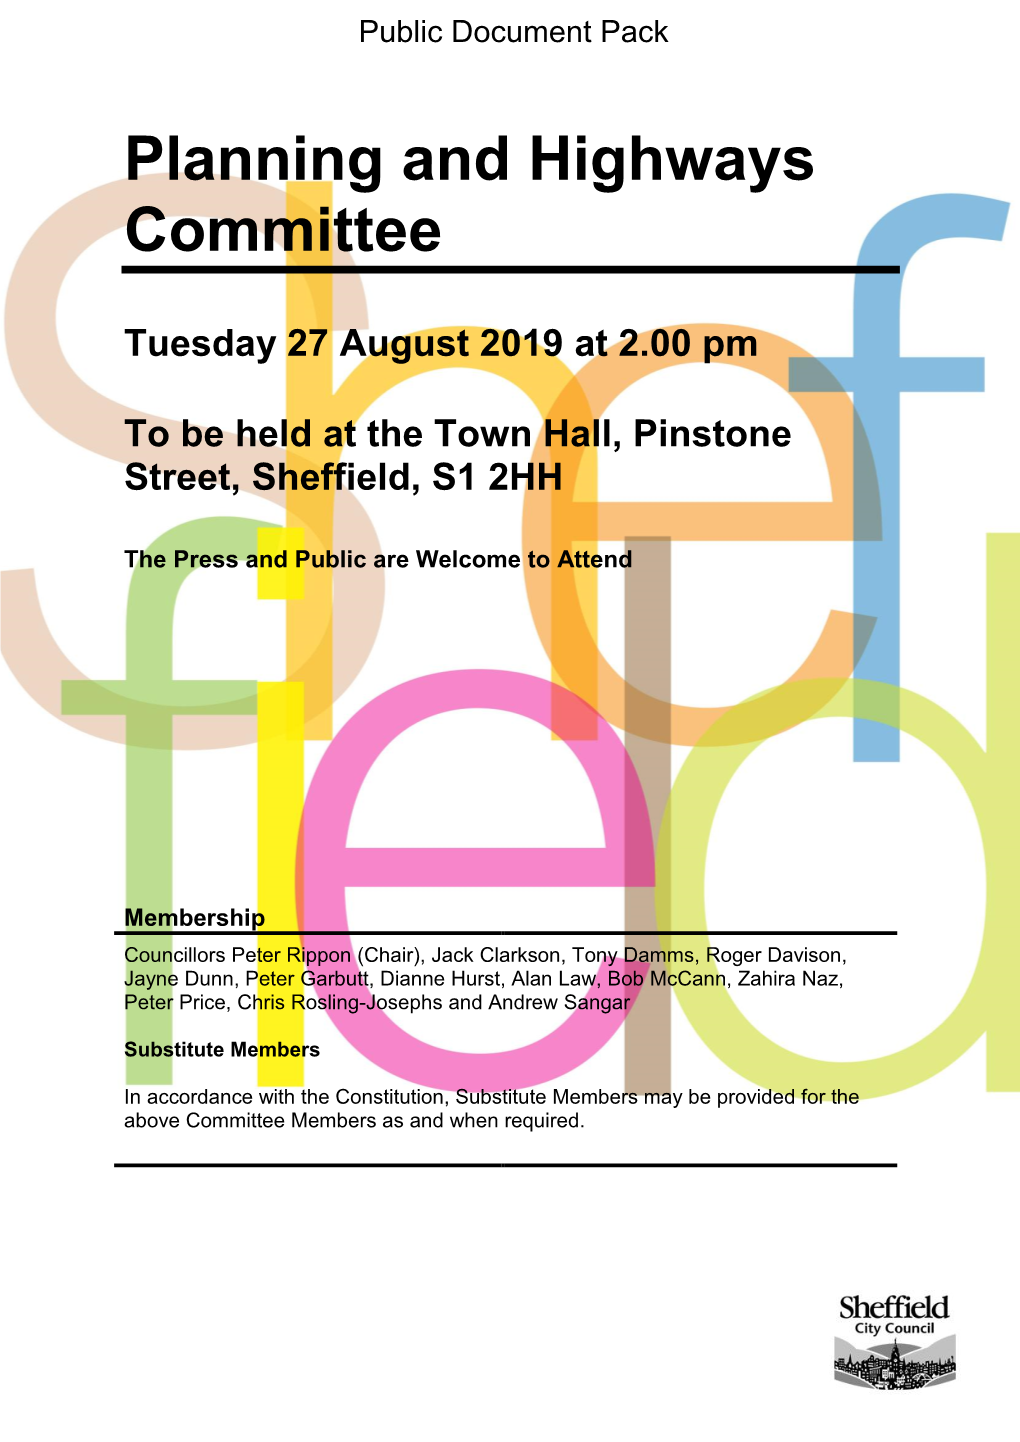 Planning and Highways Committee